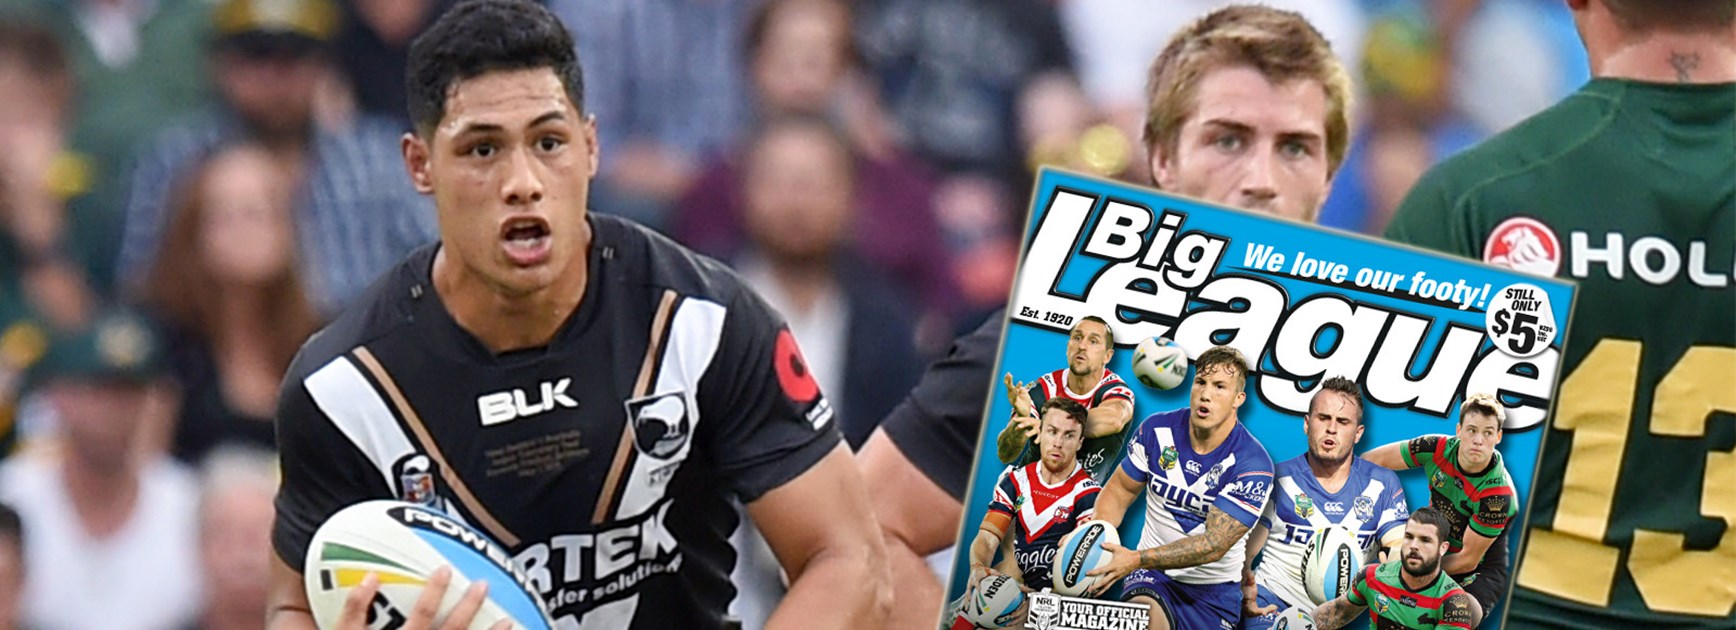 Roger Tuivasa-Sheck represents the exciting new wave of Kiwi talent coming into the game.